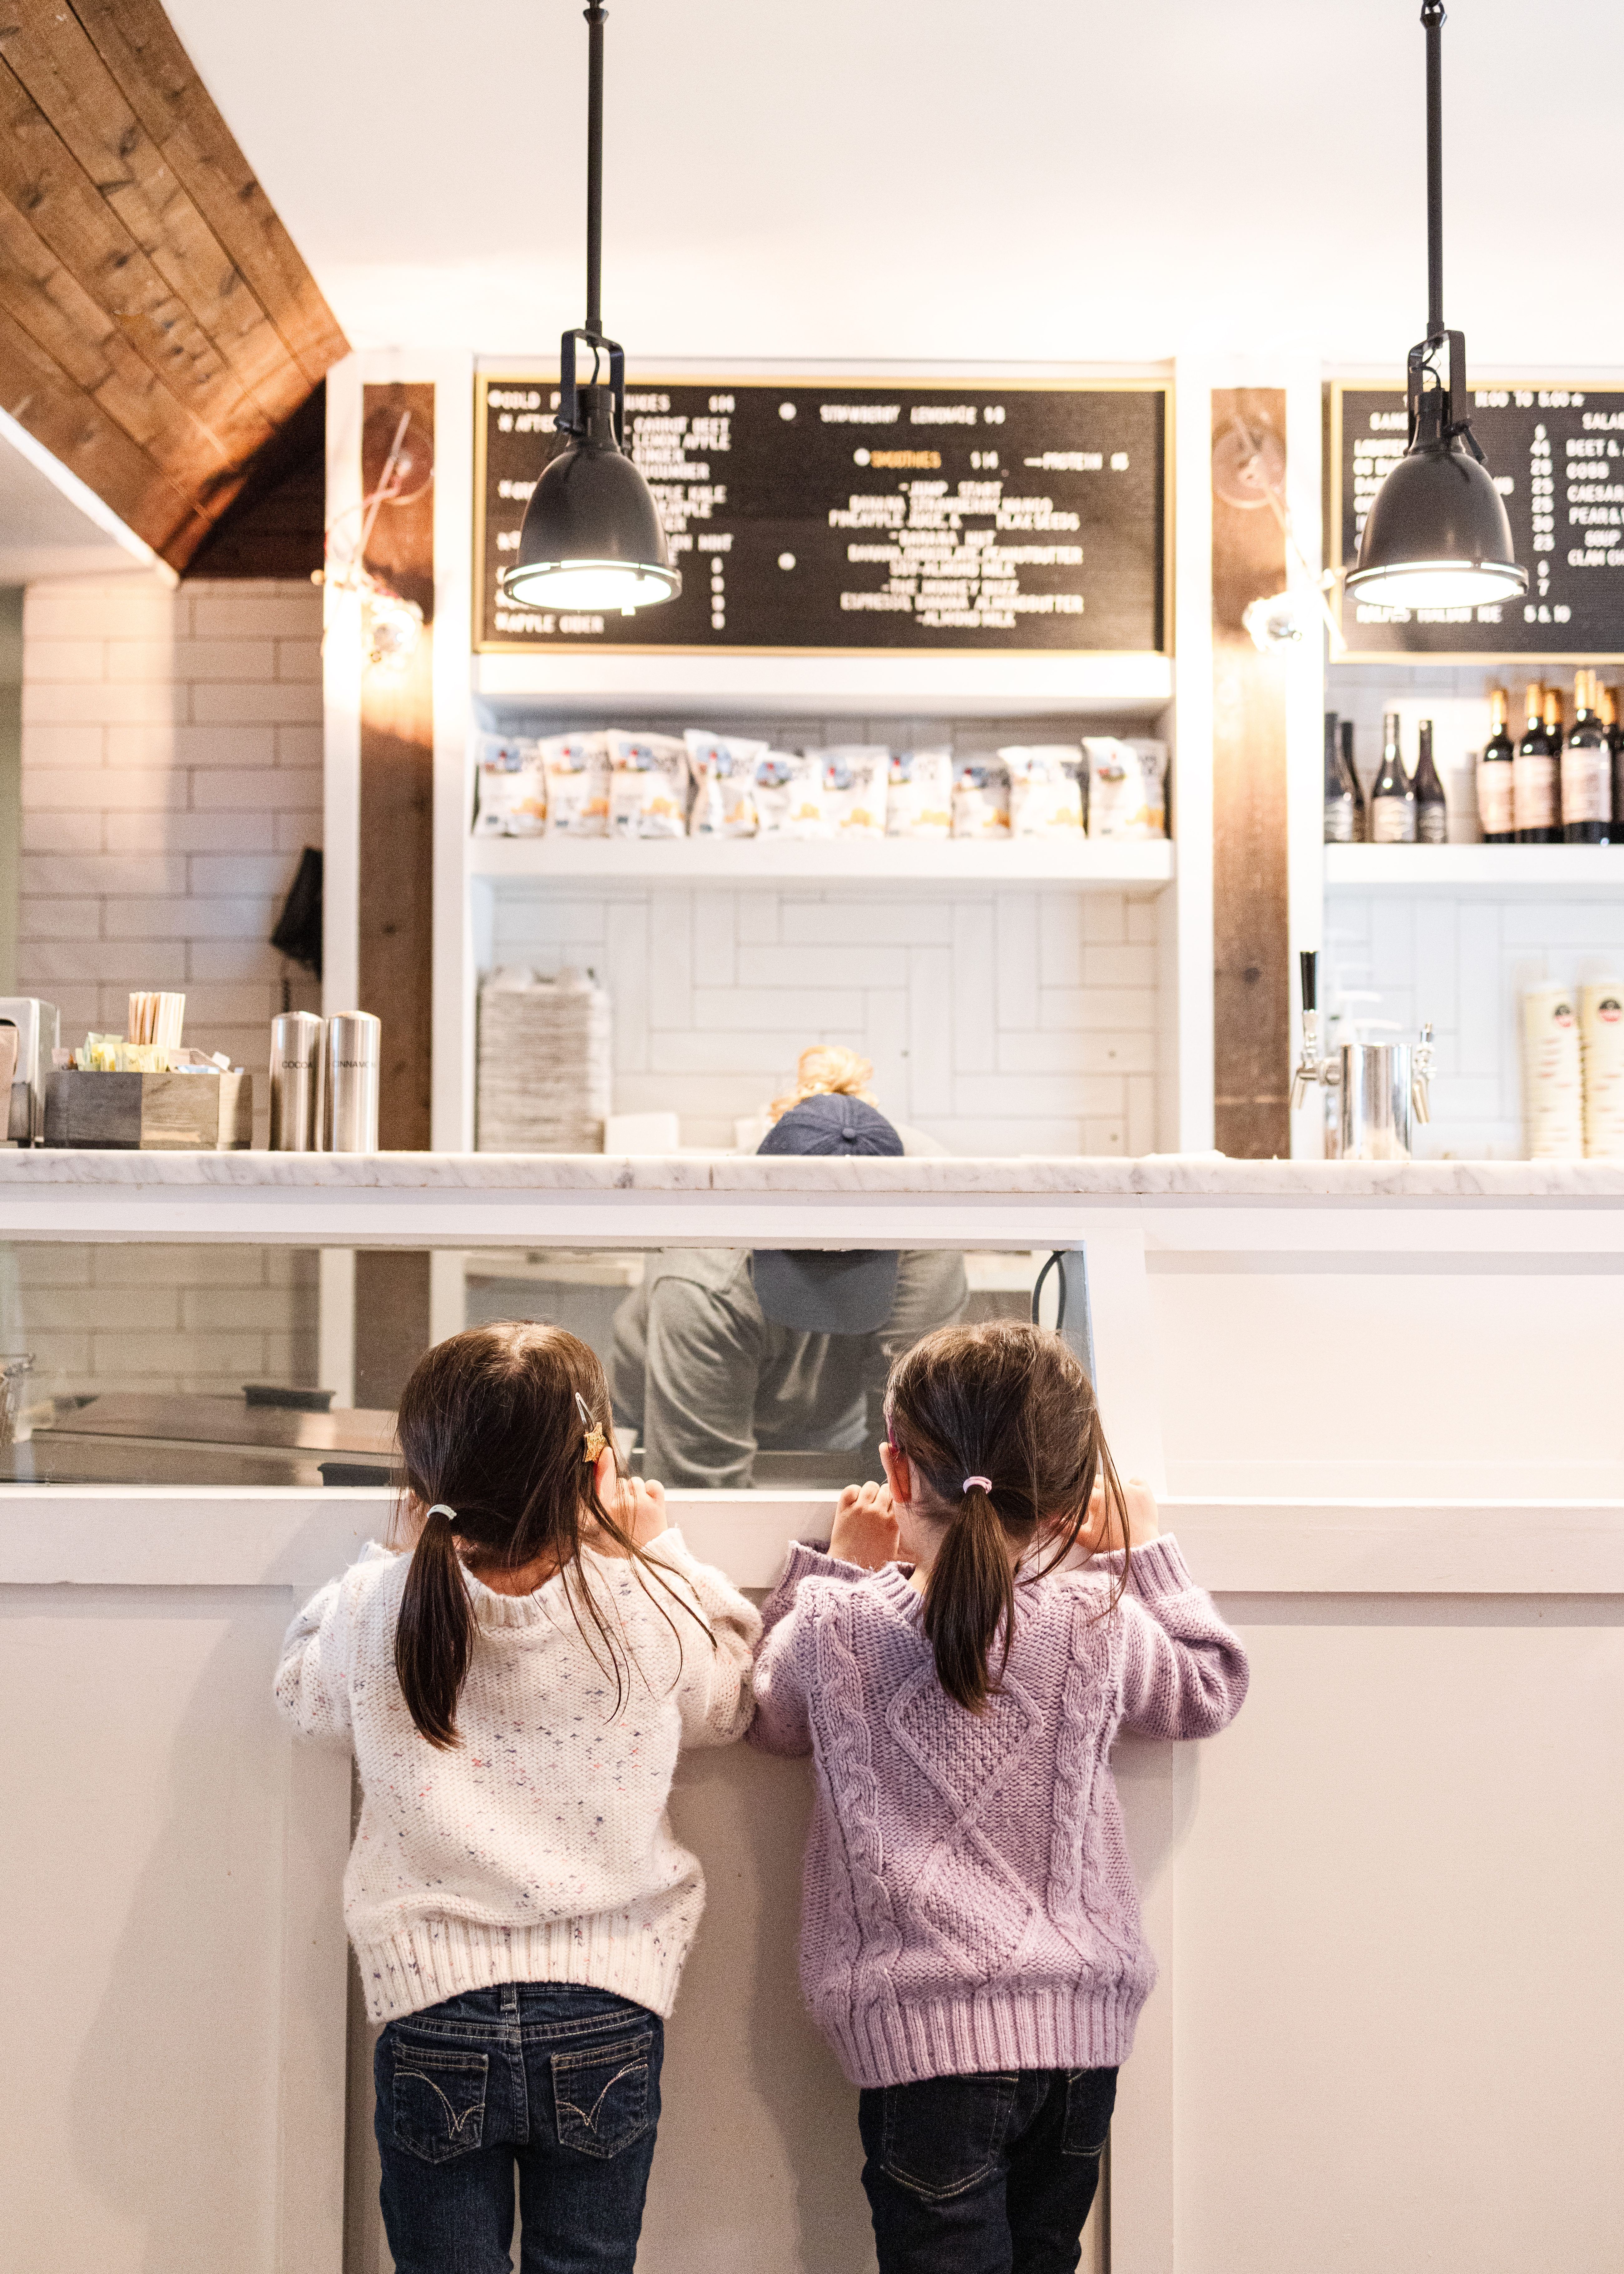 Two girls eagerly awaiting ice cream at the counter while server scoops.